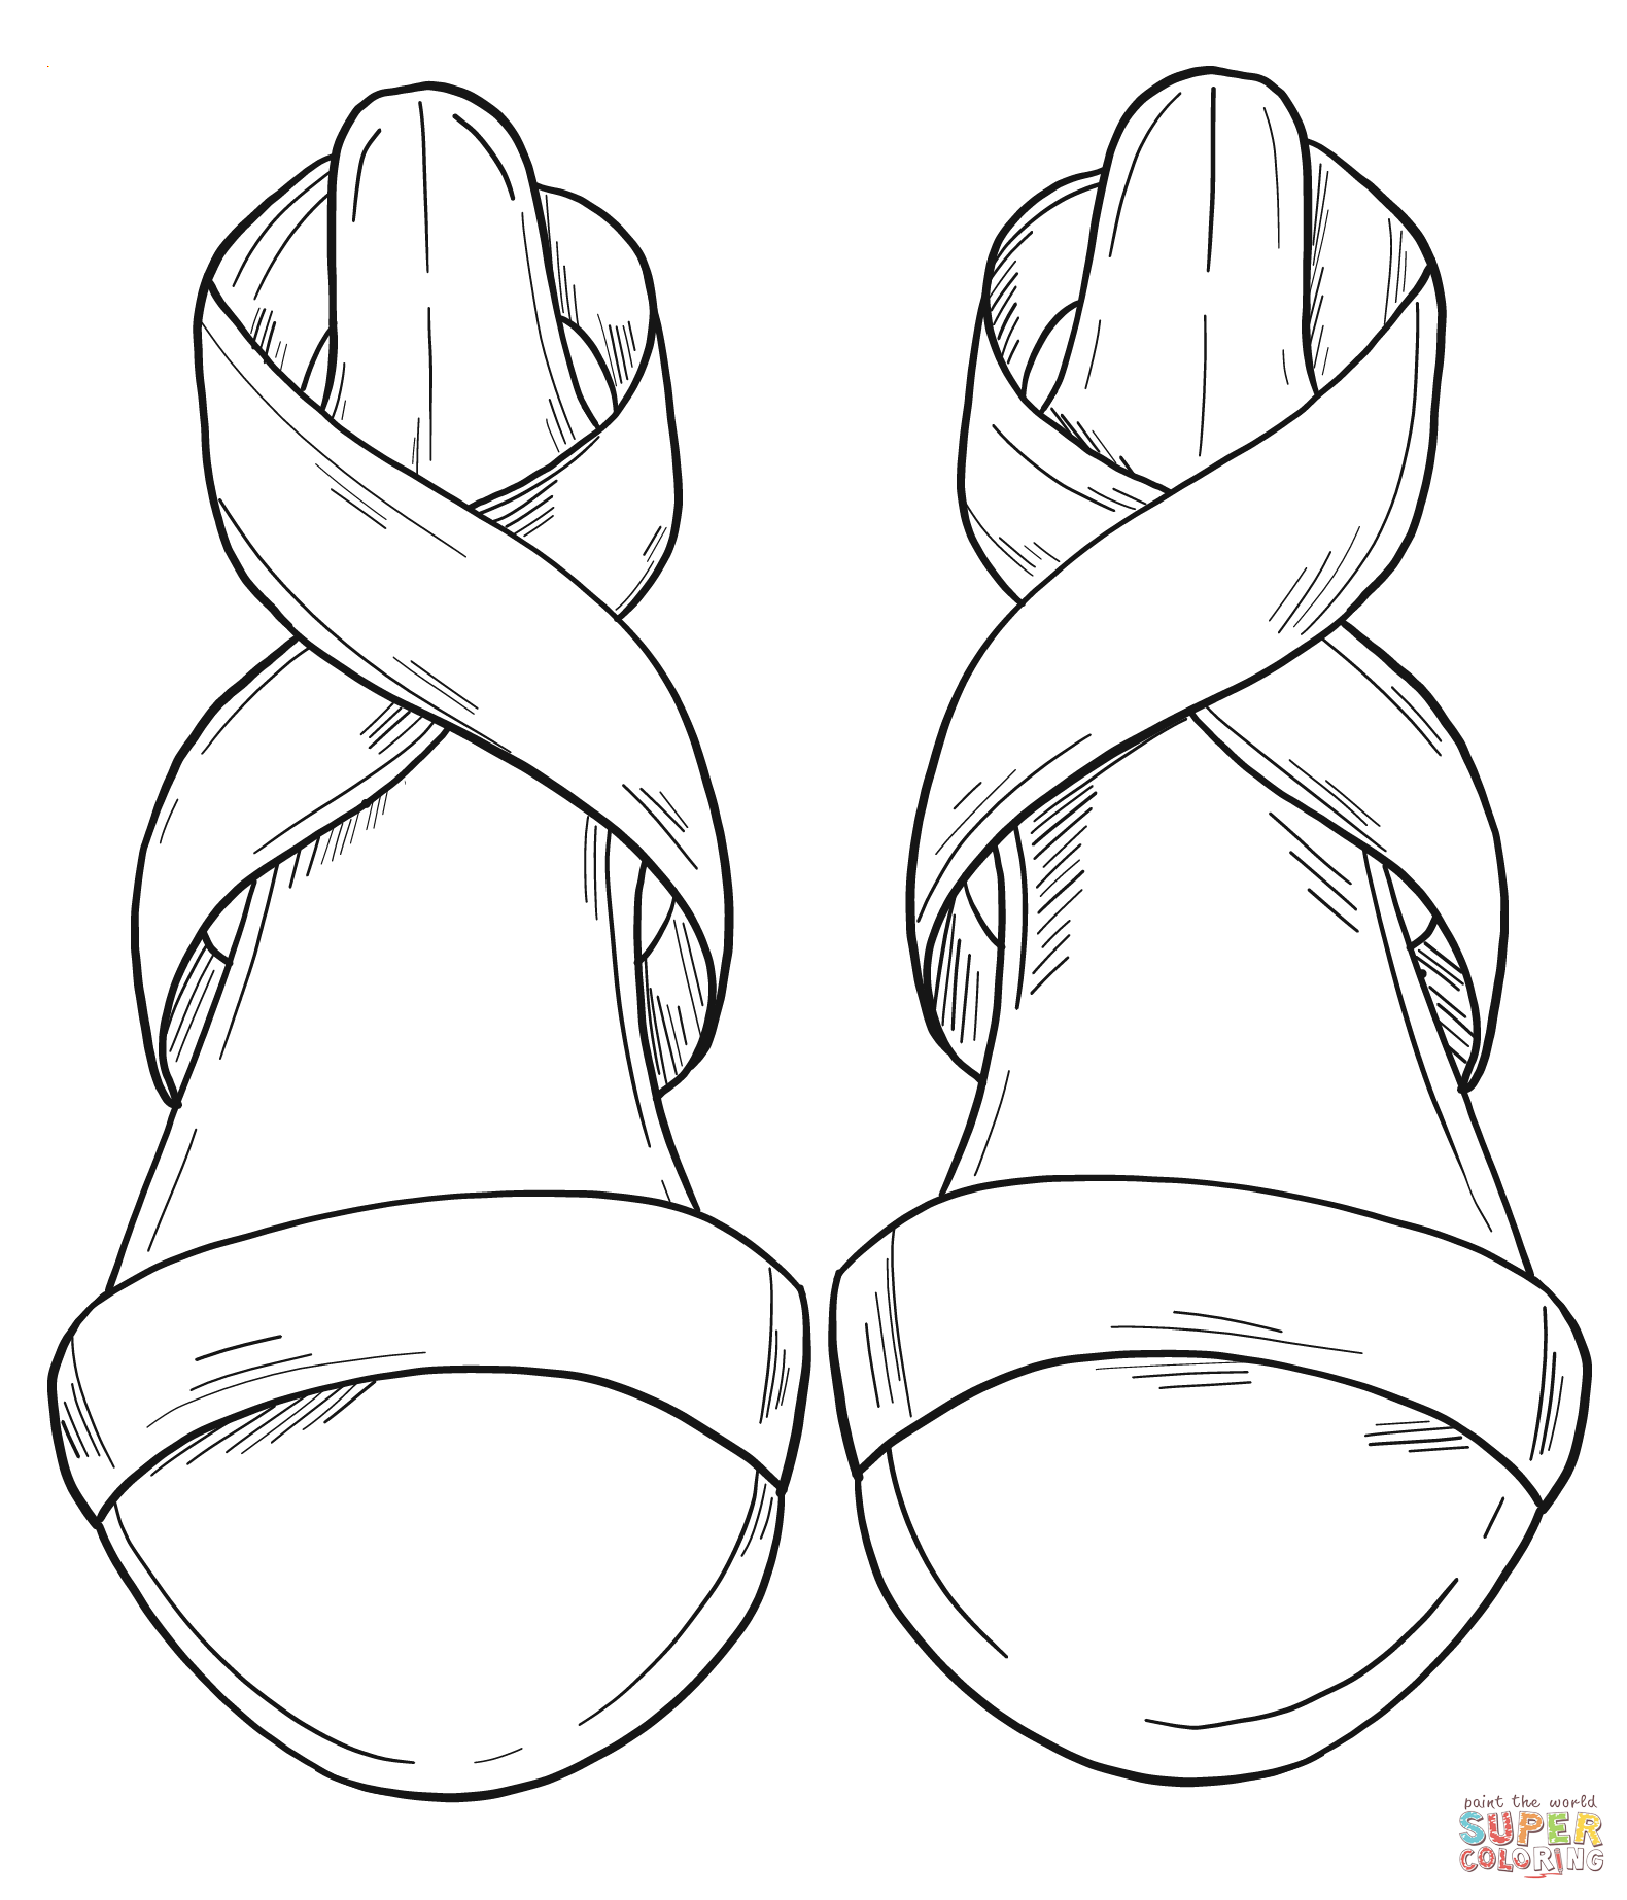 Sandals coloring page | Free Printable ...